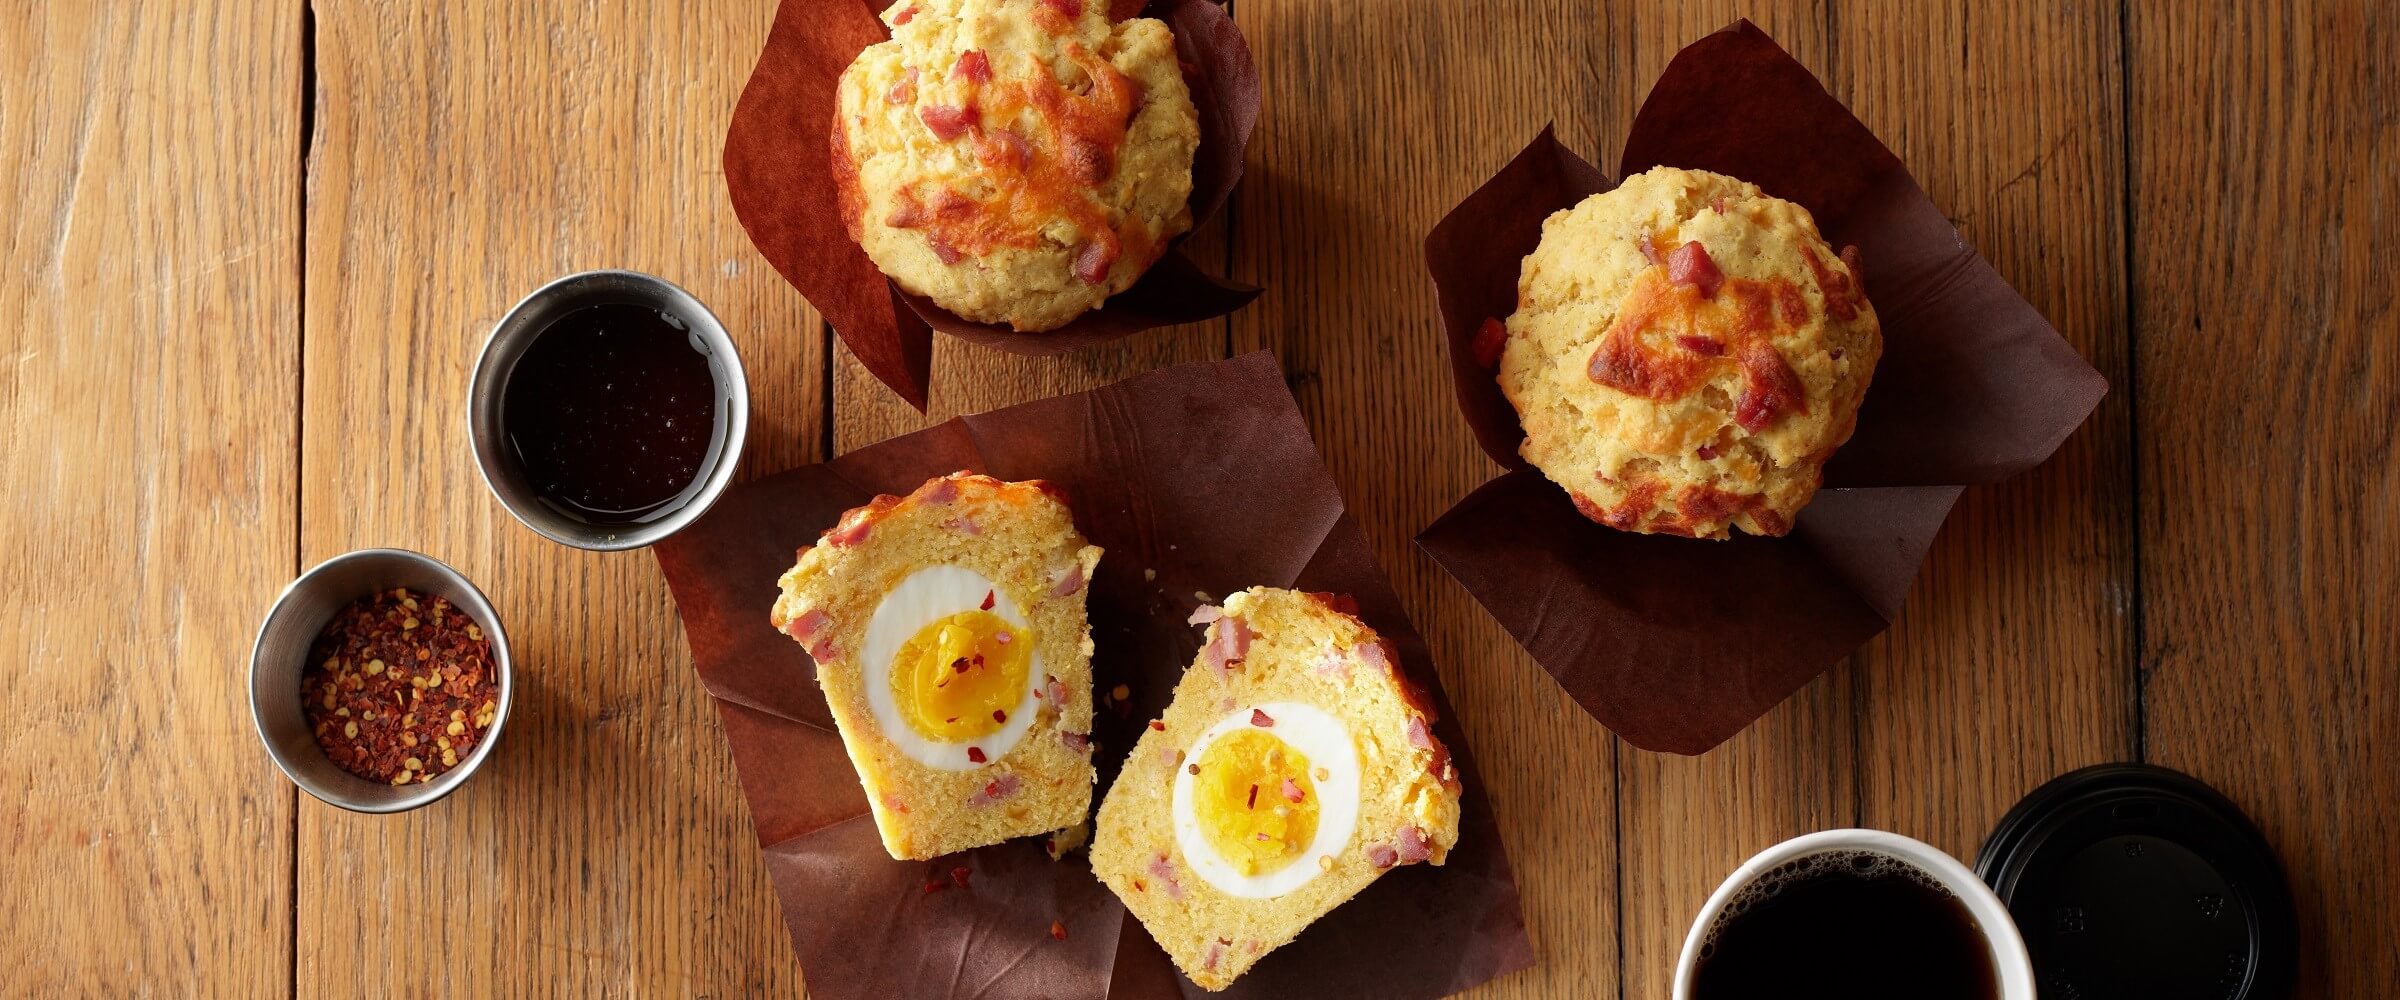 Cure 81 ham and cornbread breakfast muffins on wood table with dipping sauce